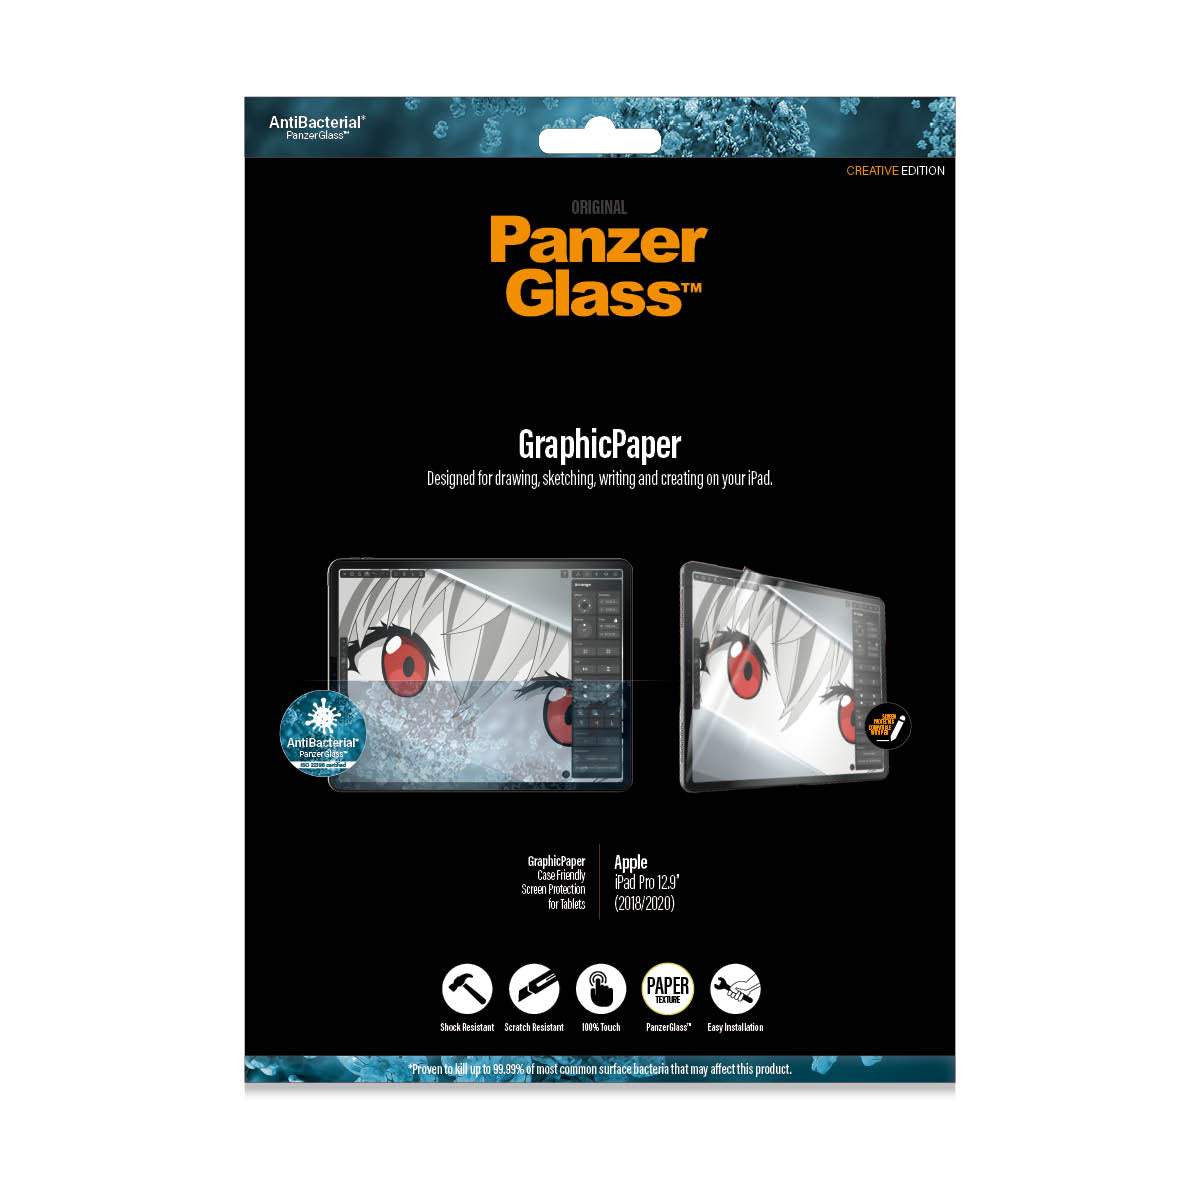 [OPEN BOX] PANZERGLASS Apple iPad Pro 12.9   (2018/2020) Graphic Paper Screen Protection - Clear